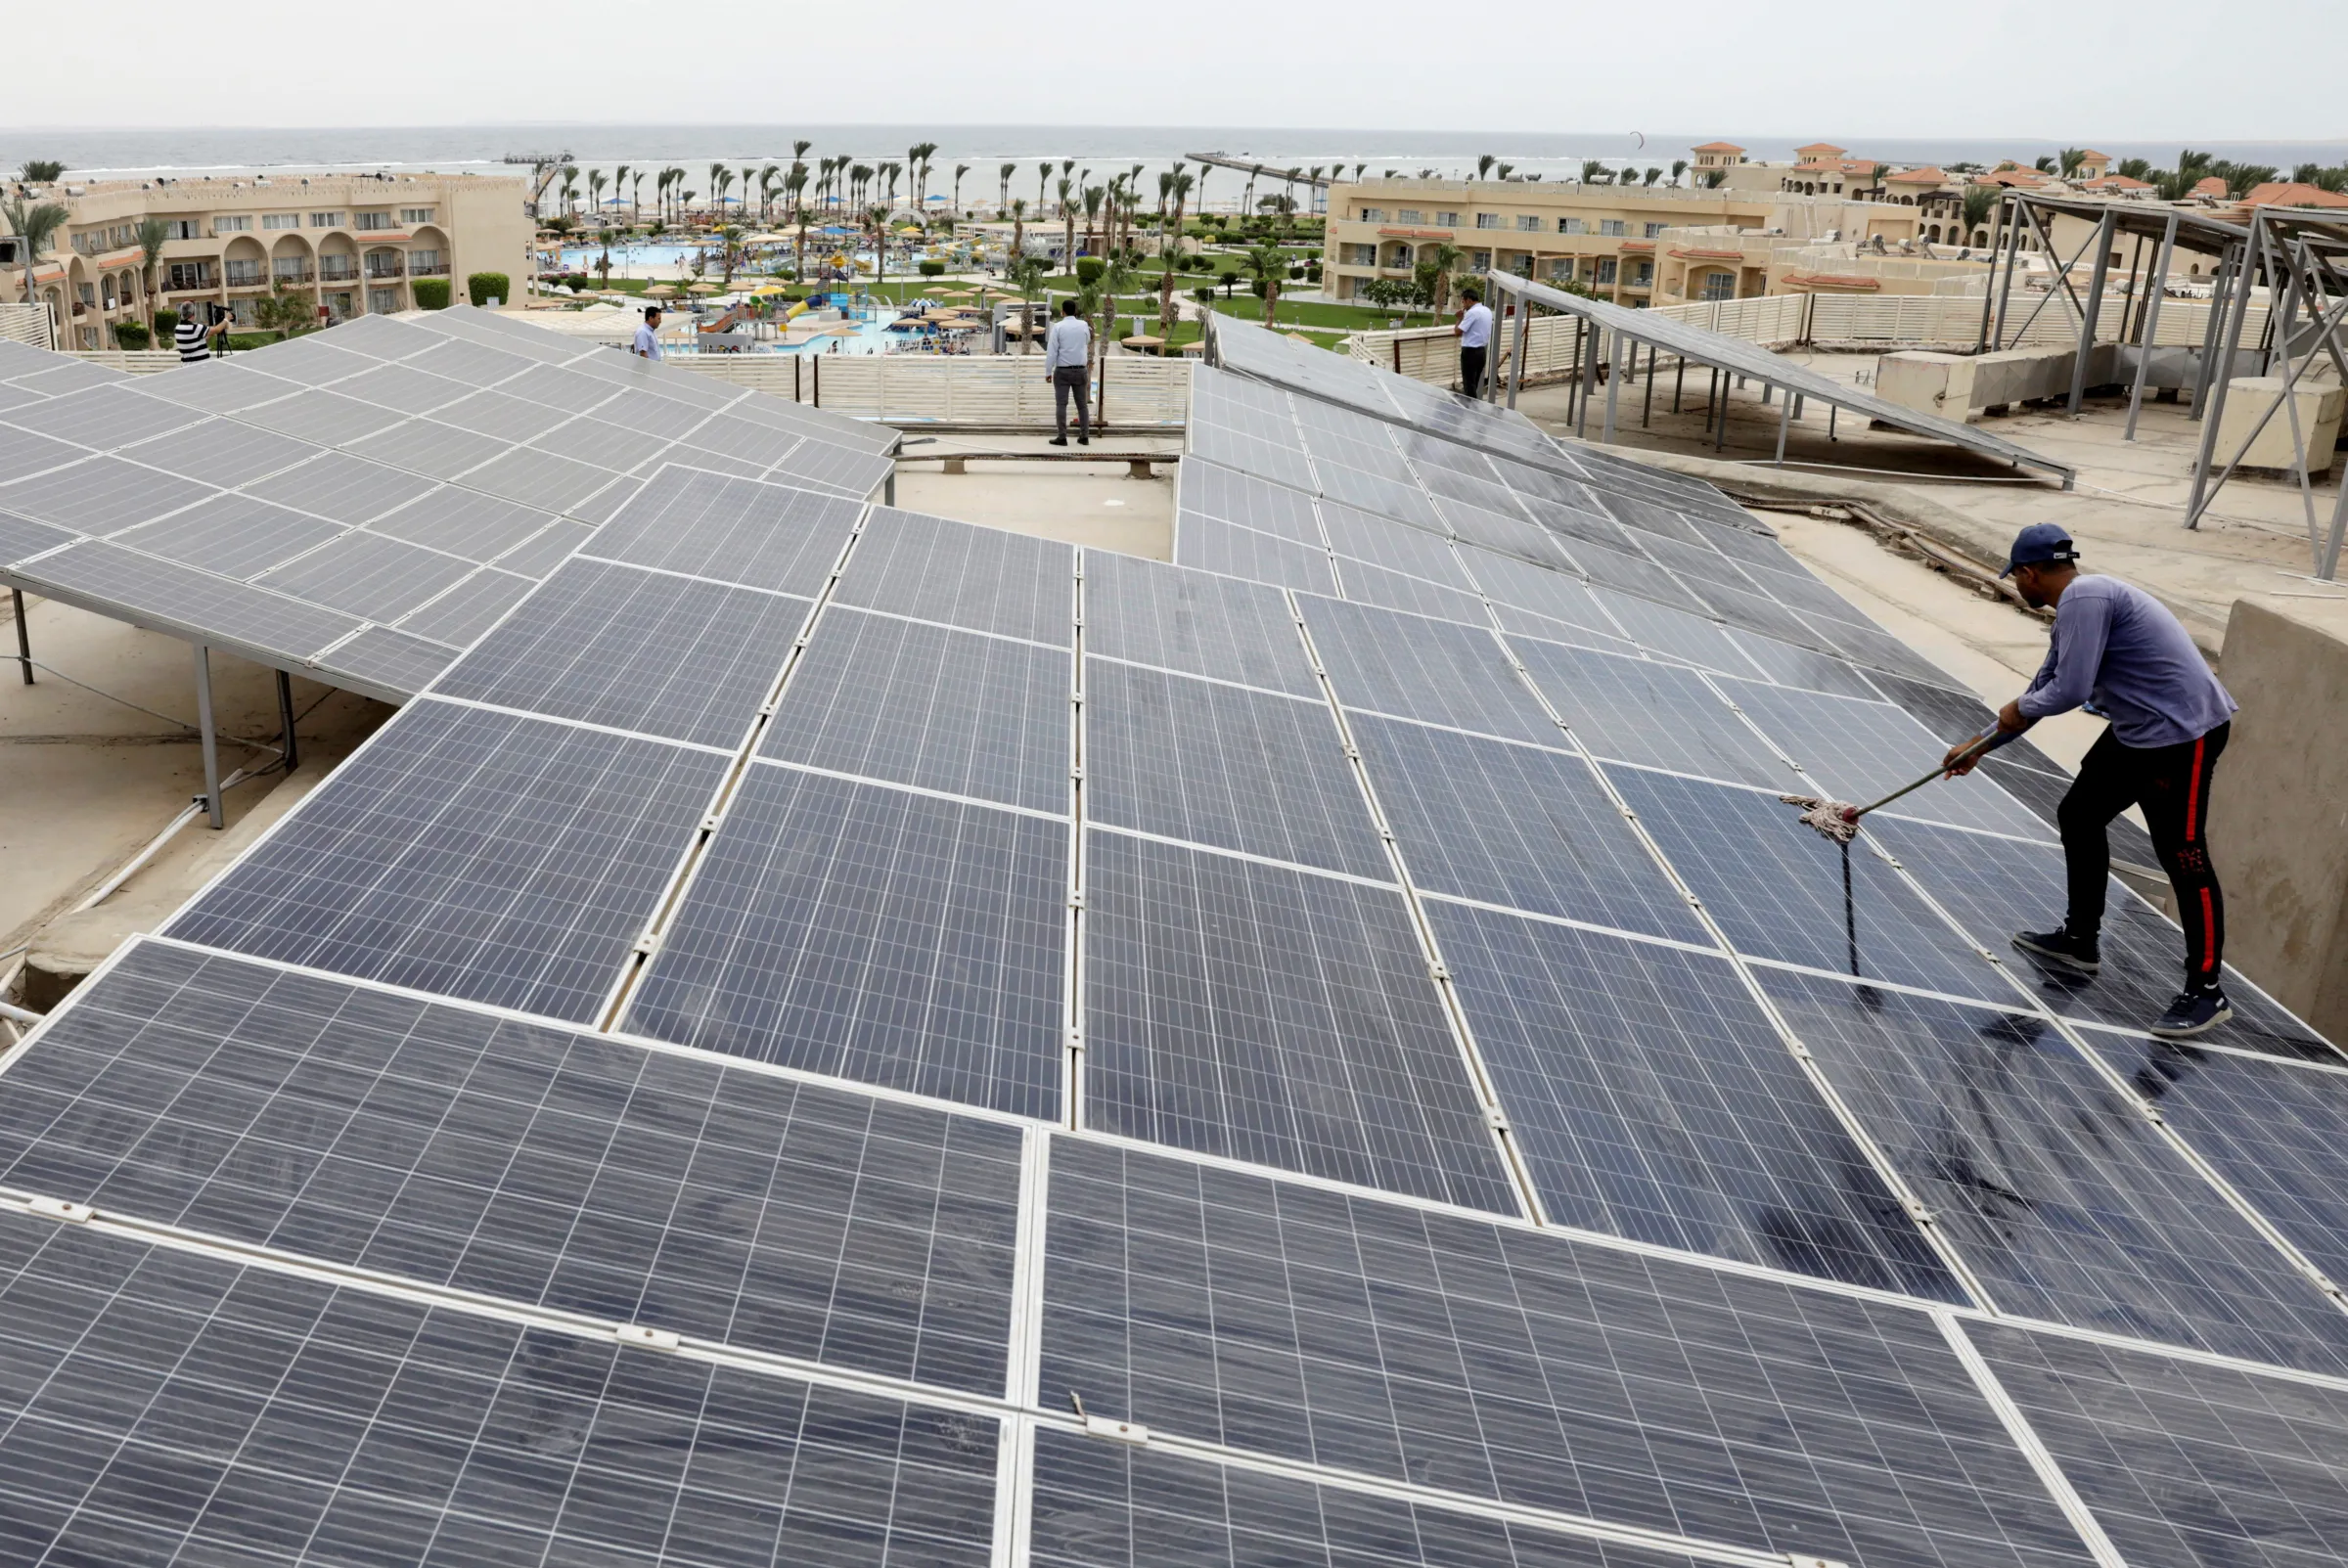 A worker cleans solar cells on a rooftop of a hotel in the resort town of Sharm el-Sheikh, the first to operate a solar-powered plant in a bid to turn to clean energy as the city prepares to host the upcoming COP27 summit in November, in Sharm el-Sheikh, Egypt, June 4, 2022. REUTERS/Mohamed Abd El Ghany